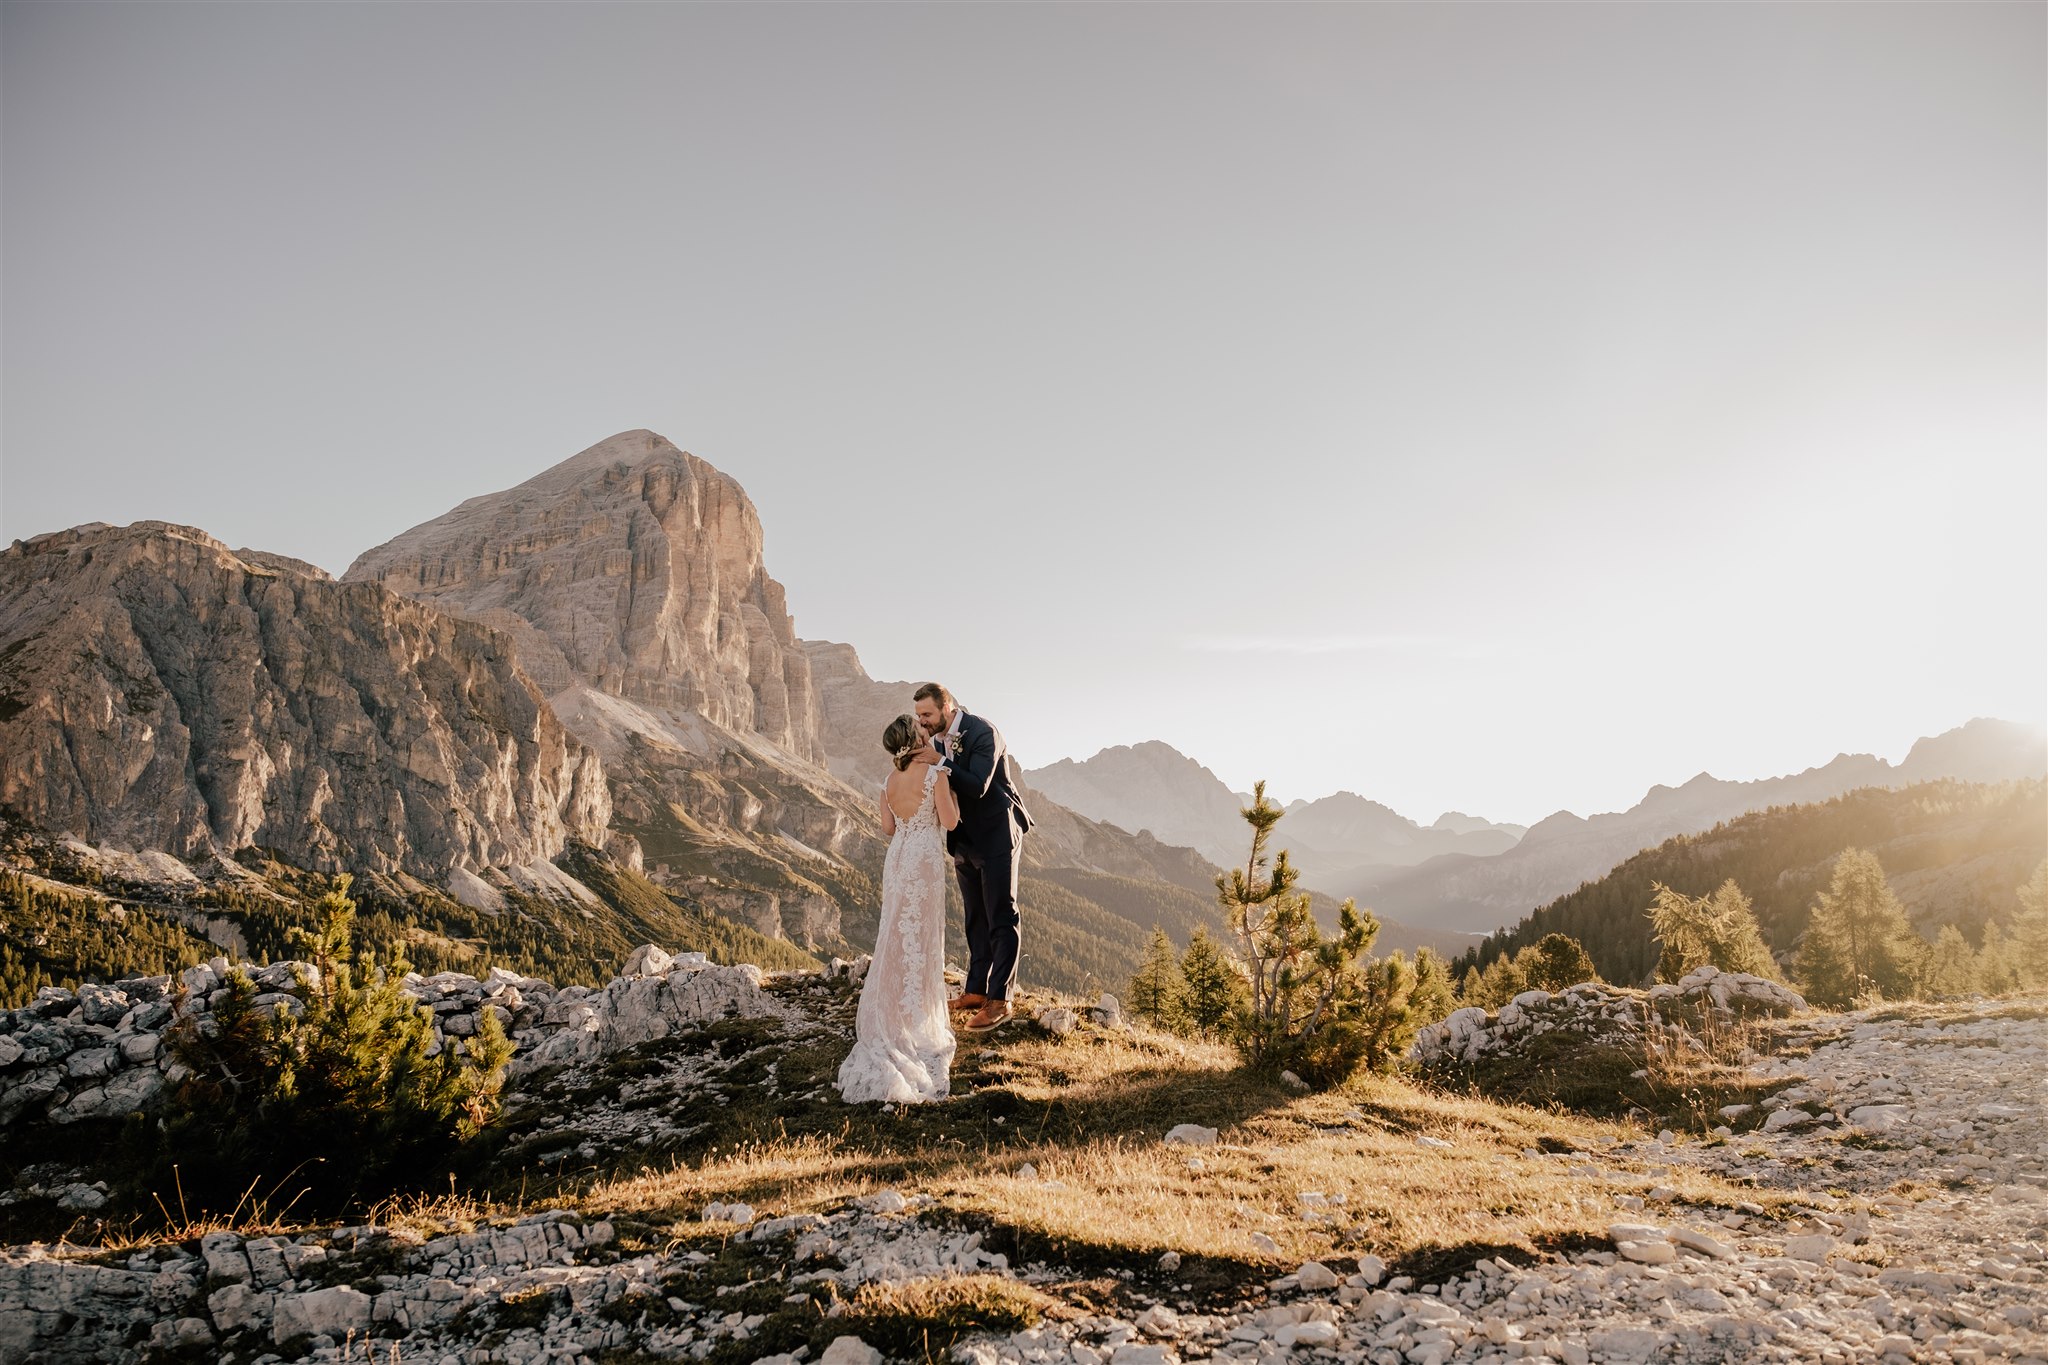 Multi-Day Hiking Elopement in the Dolomites – Shayna & Jake